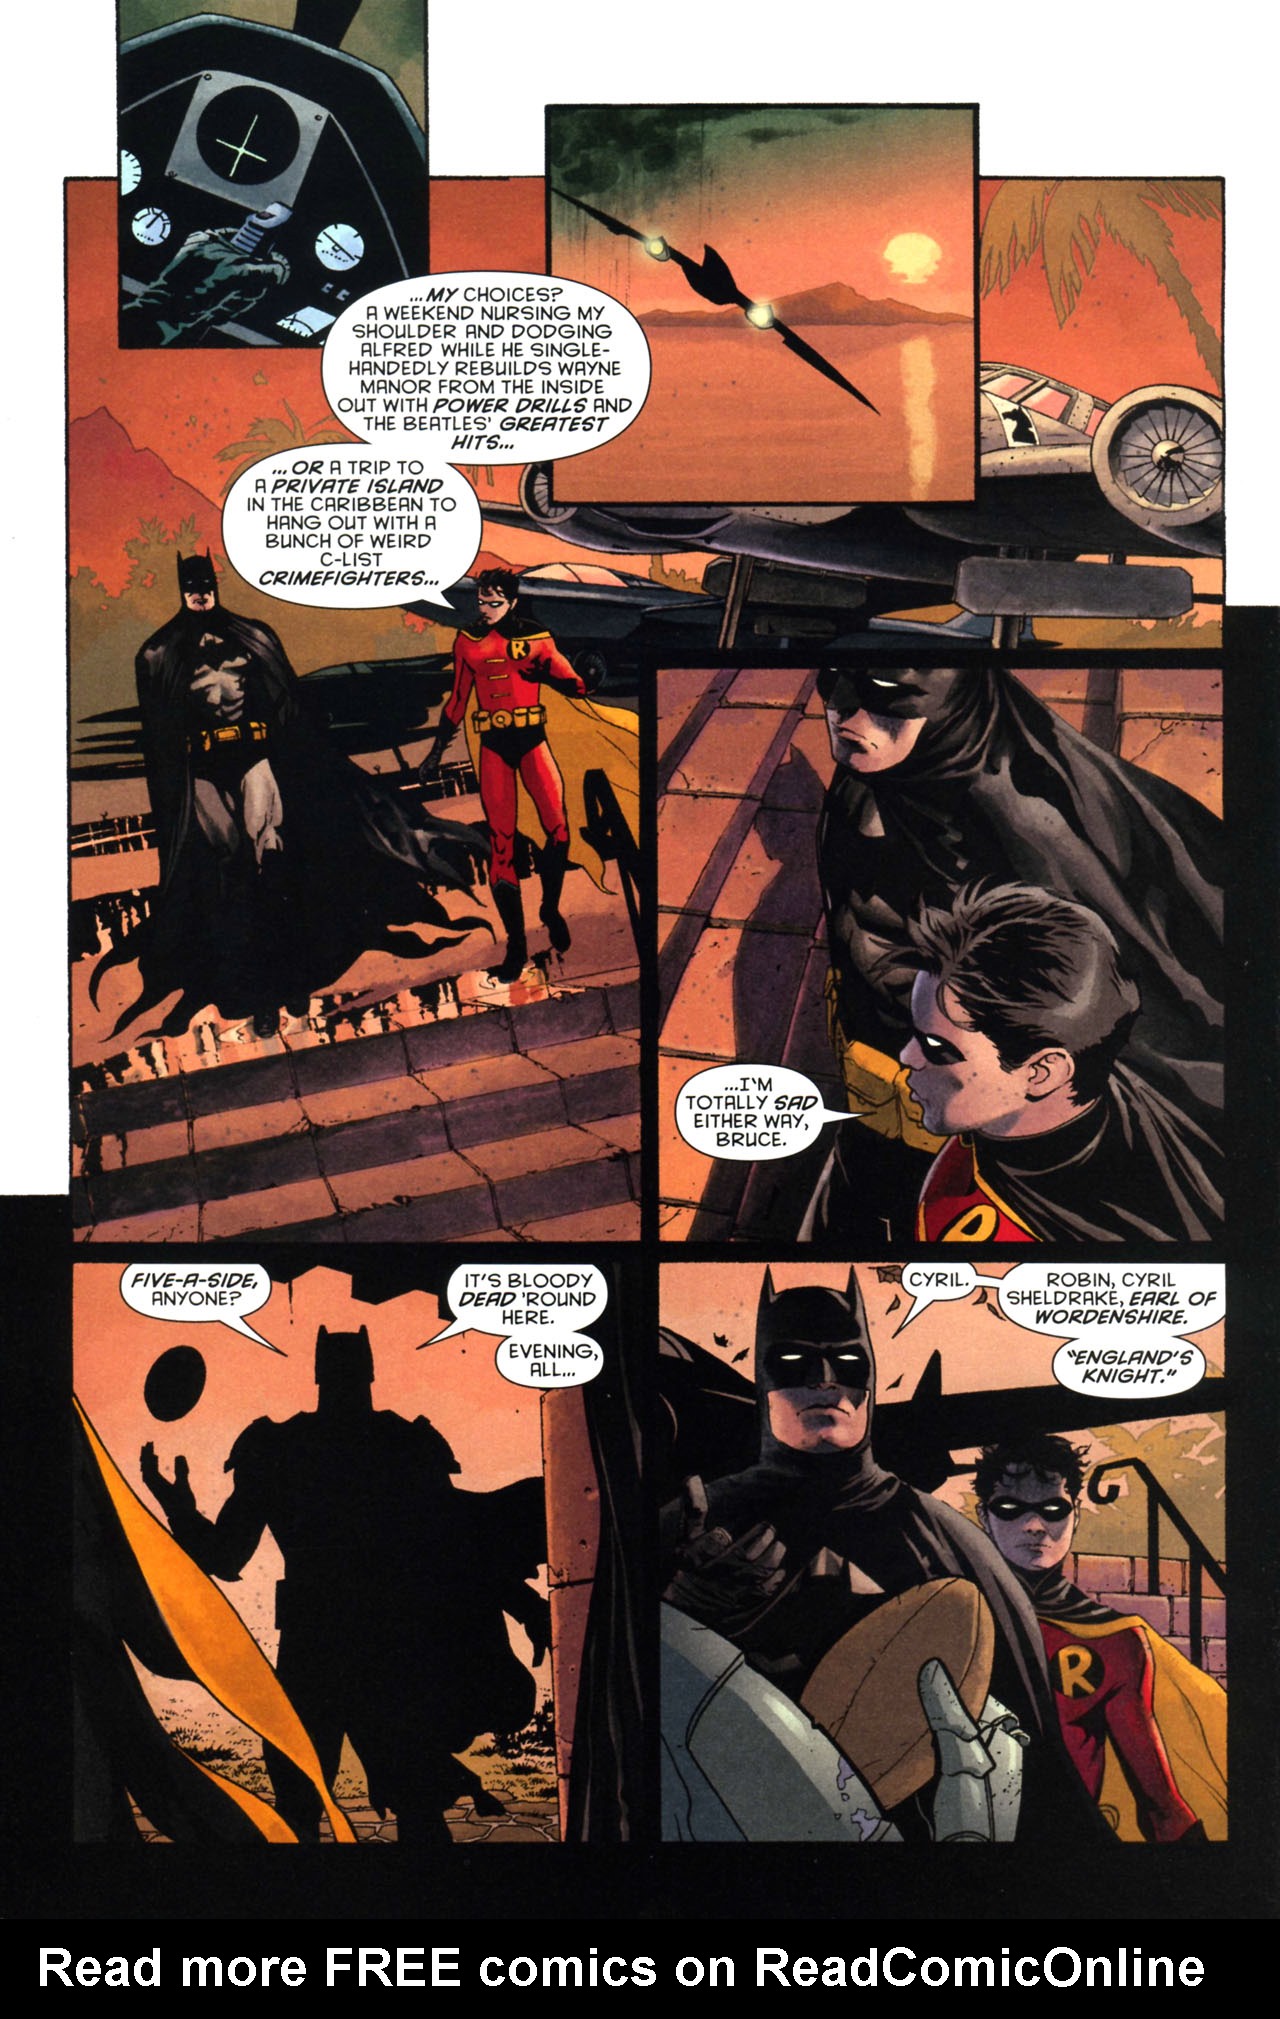 Batman 1940 Issue 667 | Read Batman 1940 Issue 667 comic online in high  quality. Read Full Comic online for free - Read comics online in high  quality .| READ COMIC ONLINE